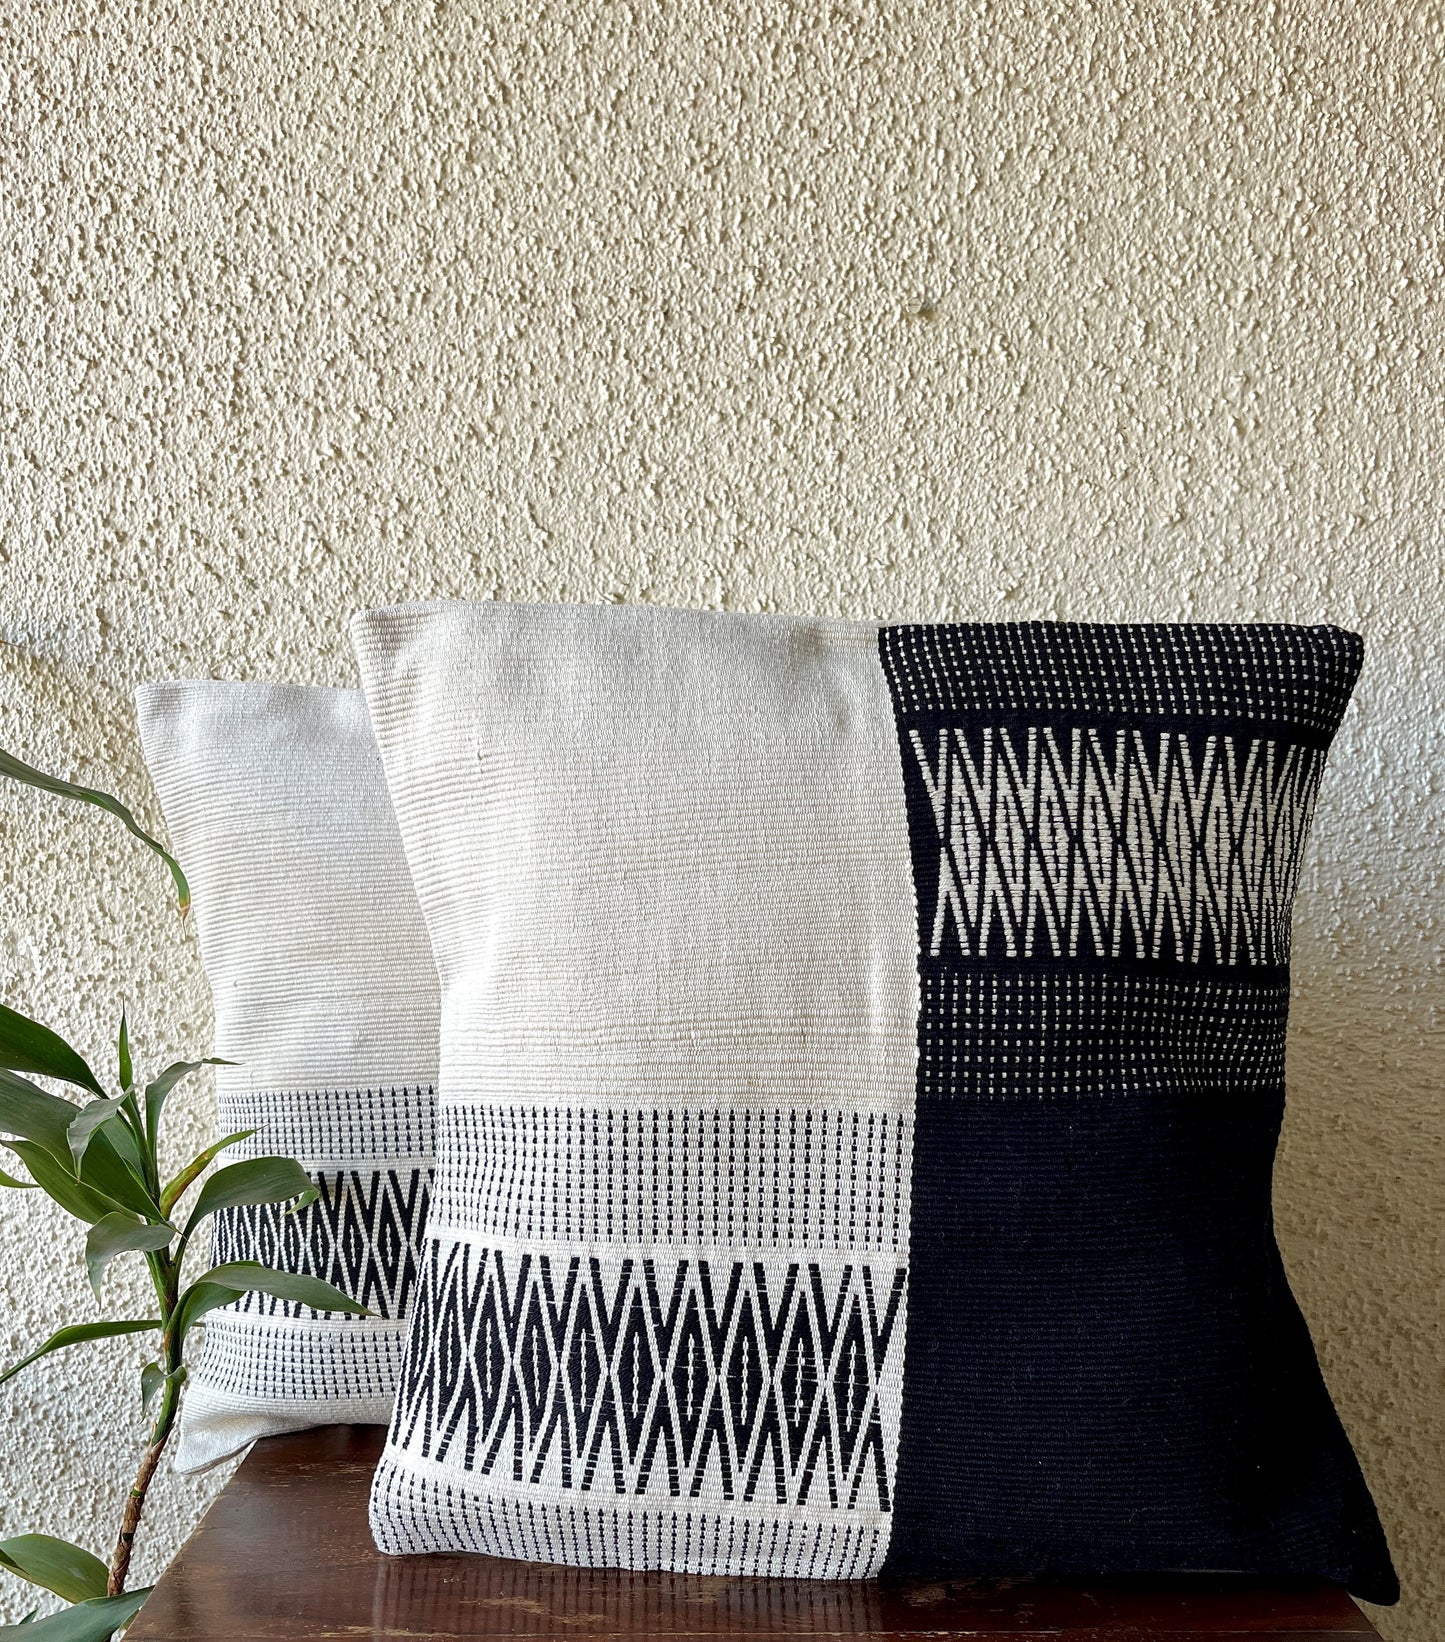 Chizami Weaves - Loin Loom Handwoven Cushion Cover Set in Black and White (Set of 4)